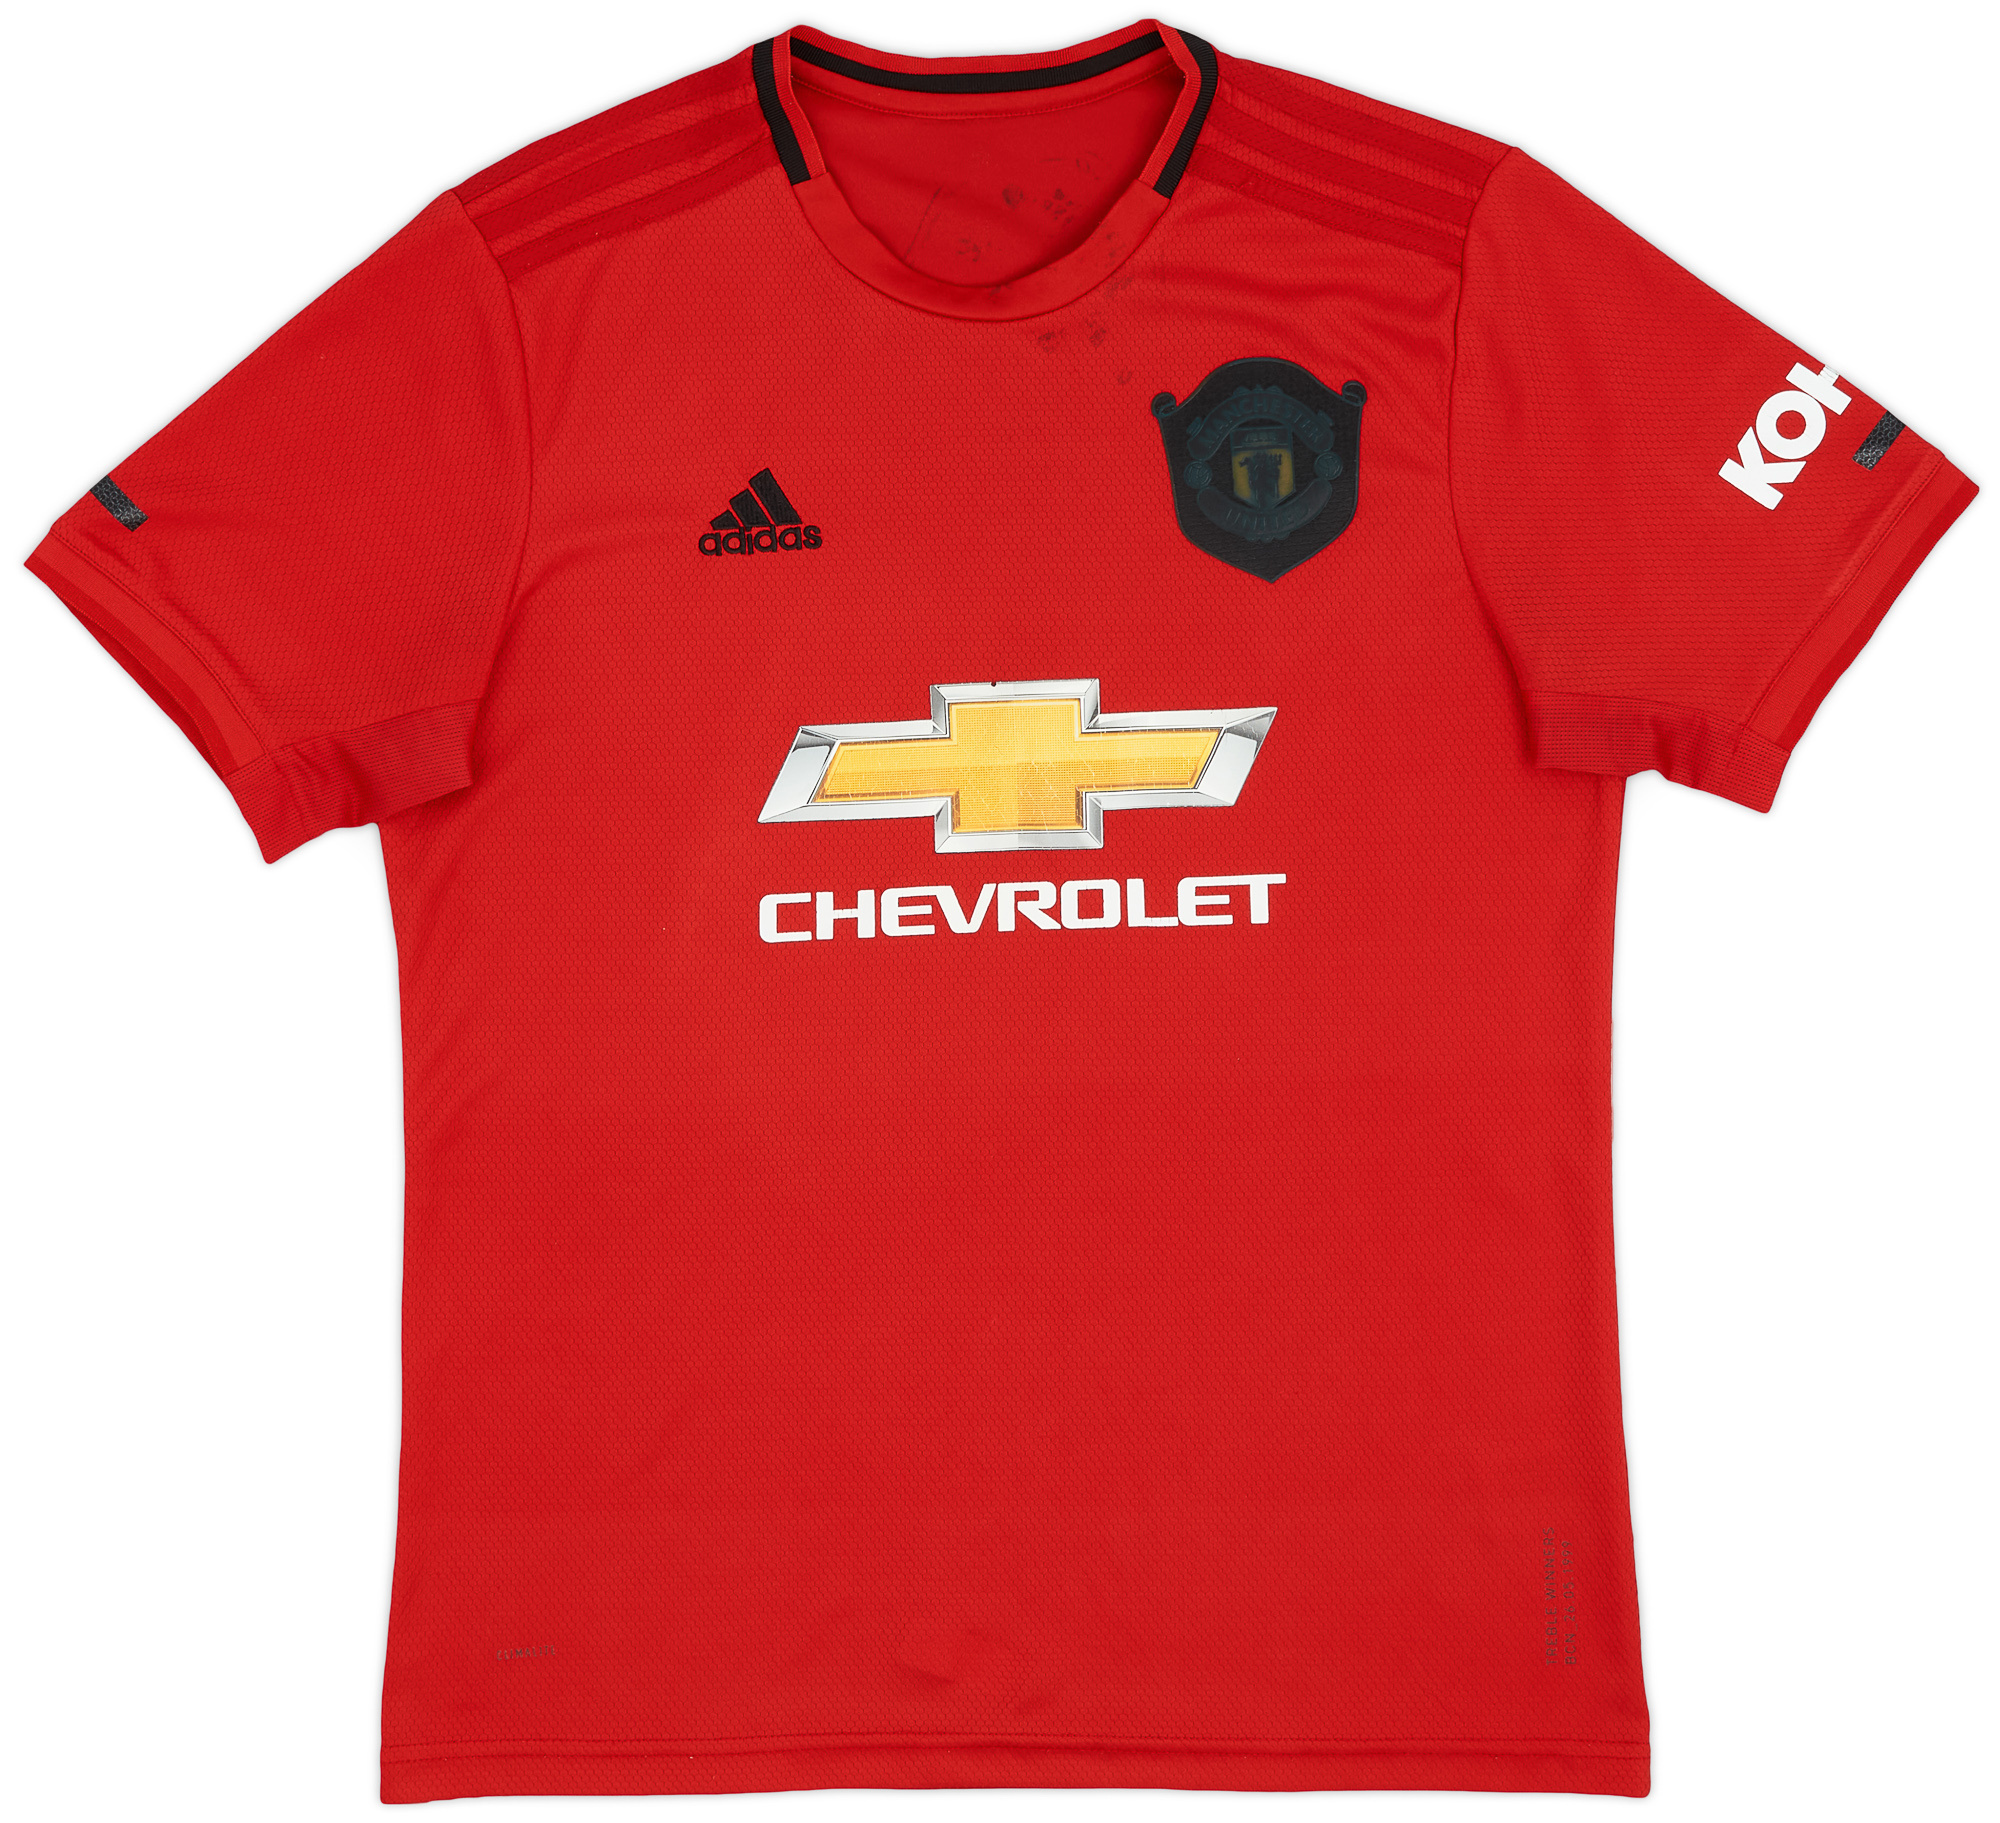 2019-20 Manchester United Home Shirt - 5/10 - ()